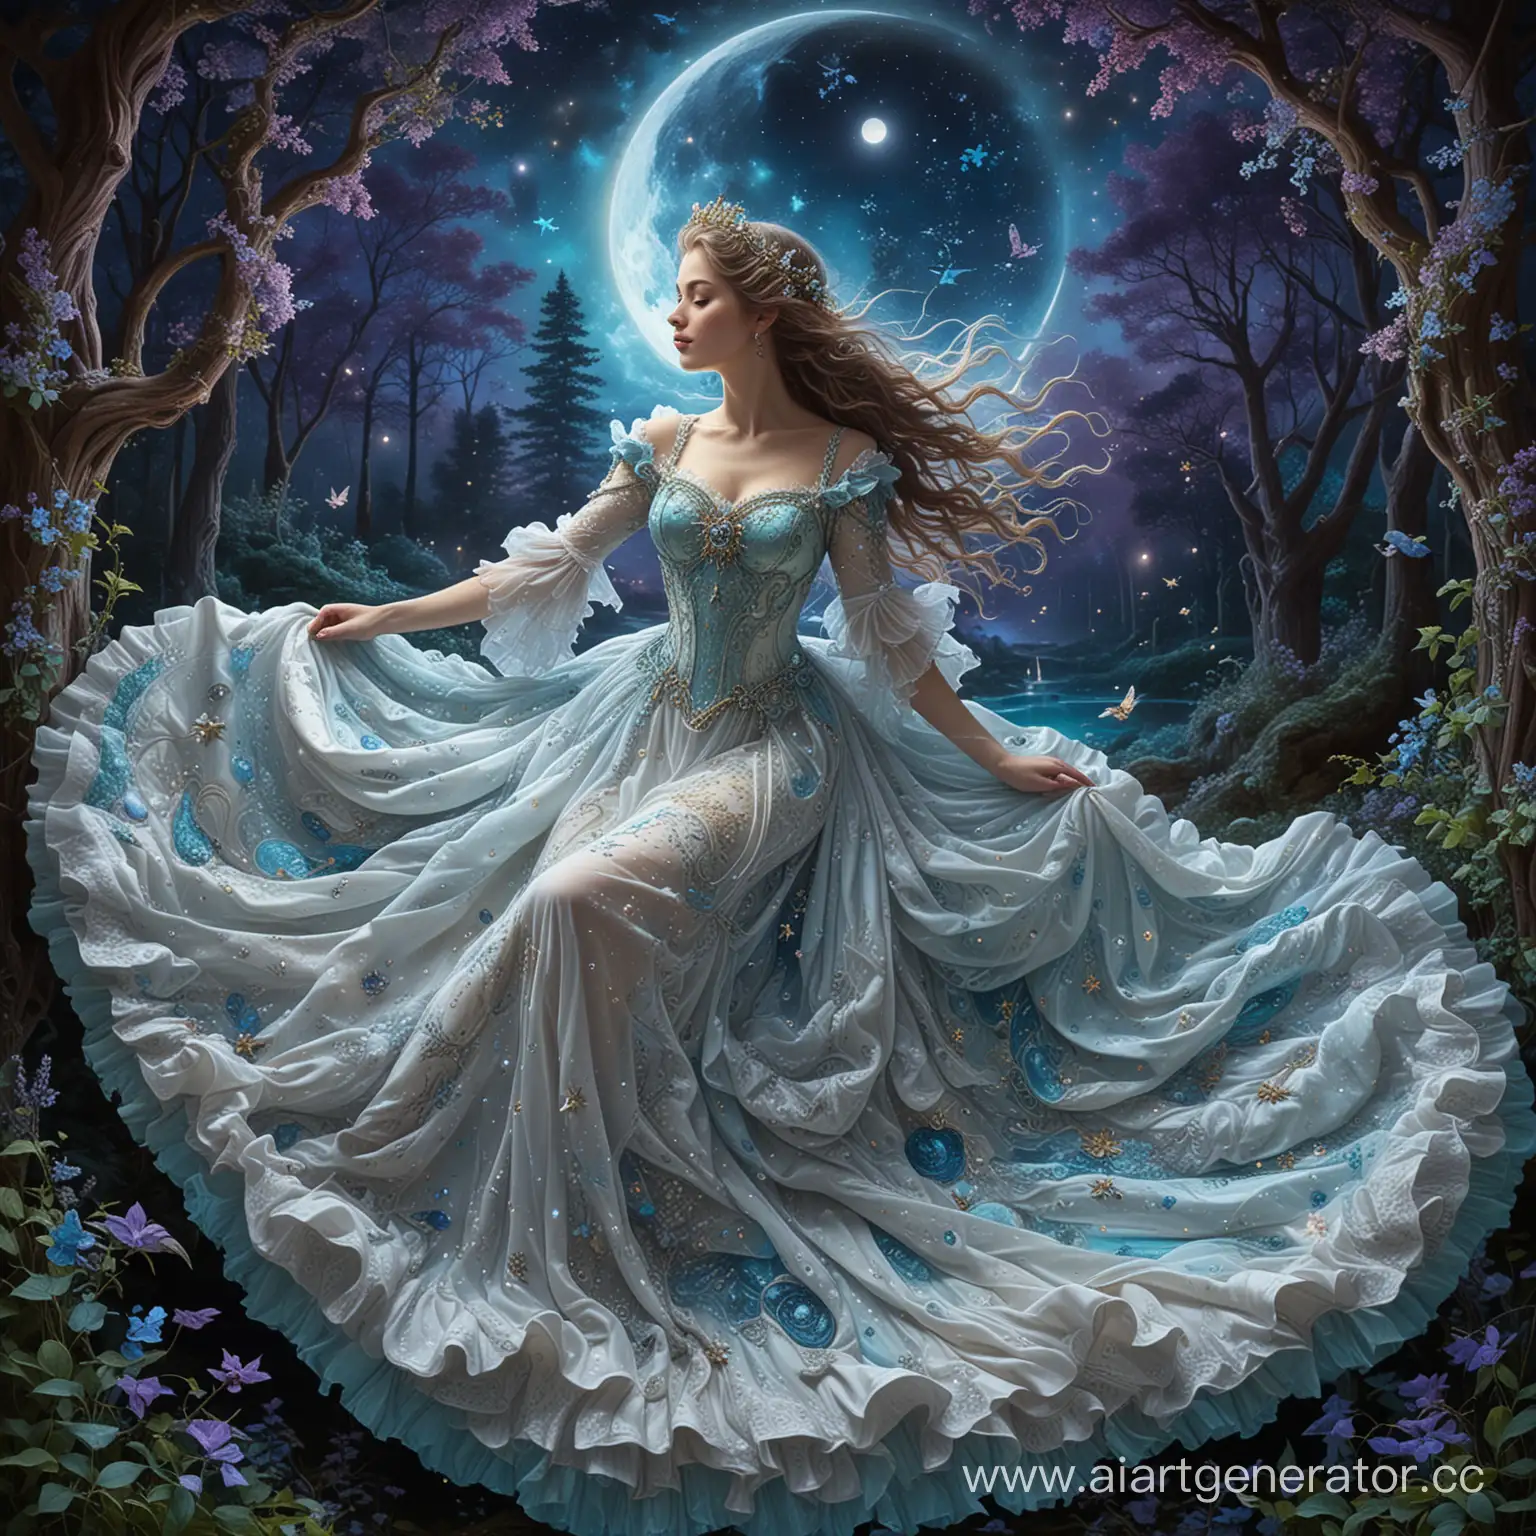 in the style of Josephine Wall, the beautiful goddess of the night descends to earth white dress a rococo whirlwind dress holds in her hands a transparent bedspread with a print of stars,night birds, flowers, ivy,the crescent moon shines brightly at night, forests in the distance, detailing,turquoise blue lilac, oil, magic, glow,glitter,diamond dust,planets, cosmo, illumination, haze, megadetalization, surrealism ,3D volumetric,clear drawing of contours,bright colors